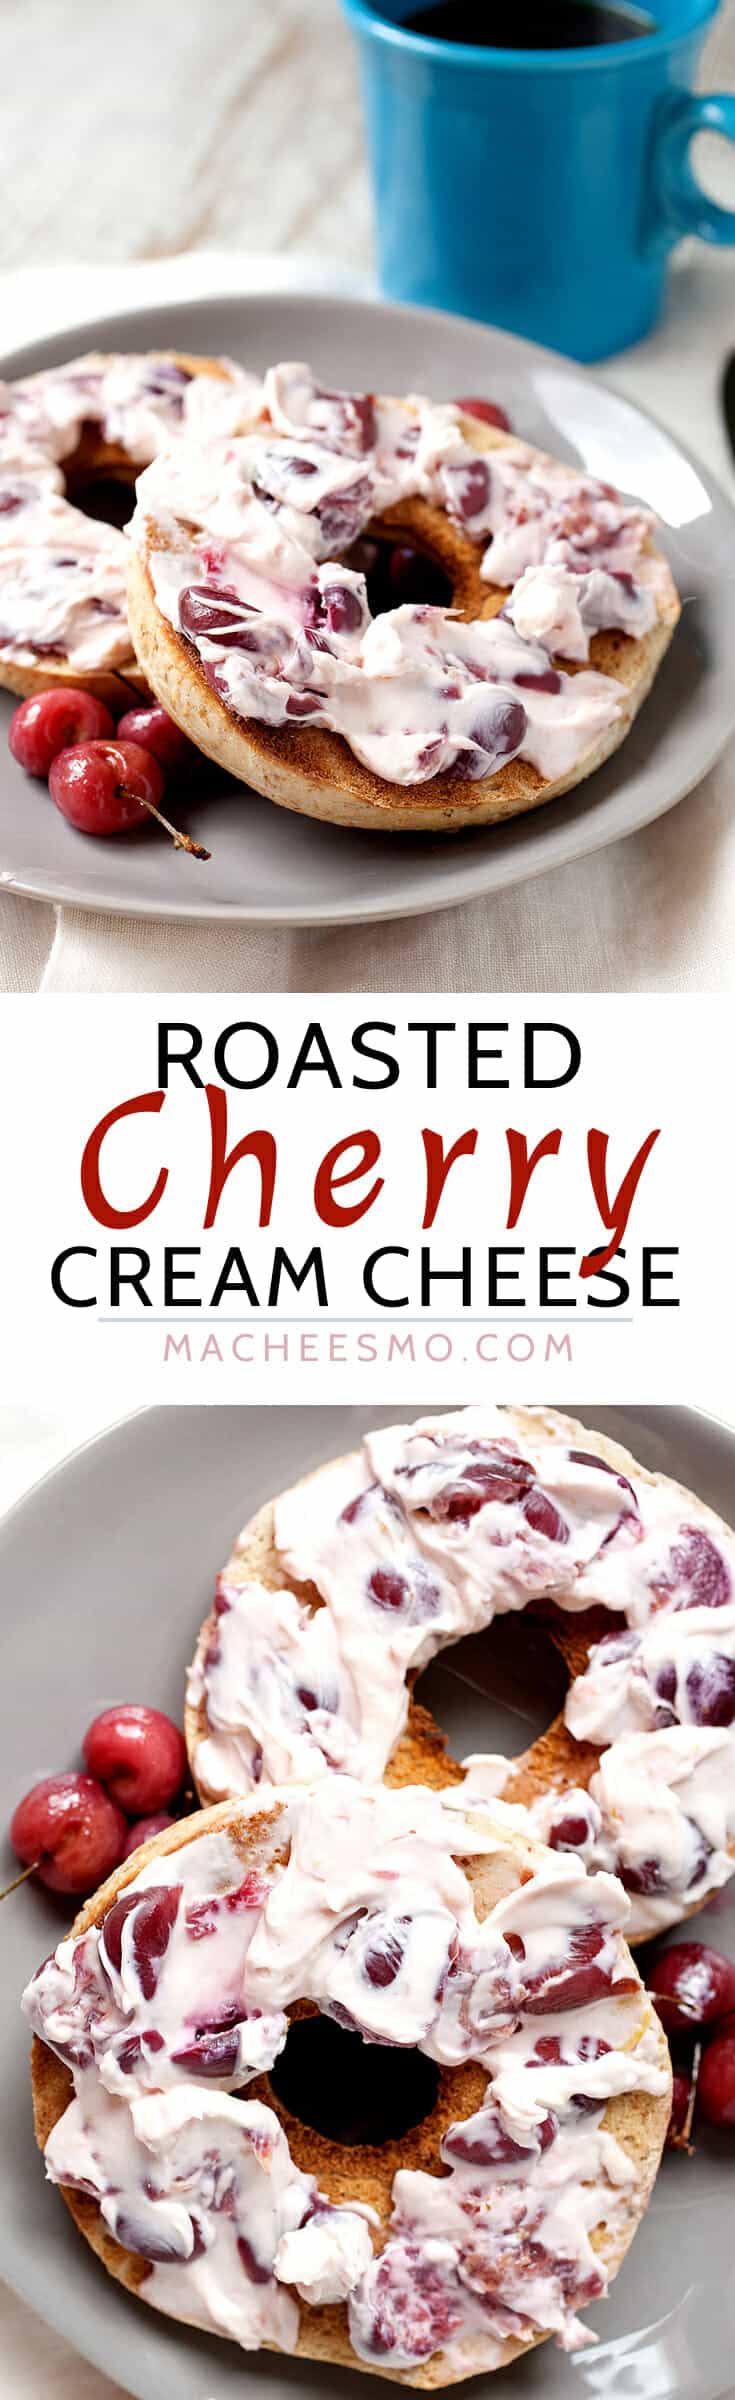 Roasted Cherry Cream Cheese: Not a bagel topper you can buy in the store, but a perfect one to make at home when delicious ripe cherries are in season. Lemon, honey, and packed full of roasted sweet cherries. | macheesmo.com